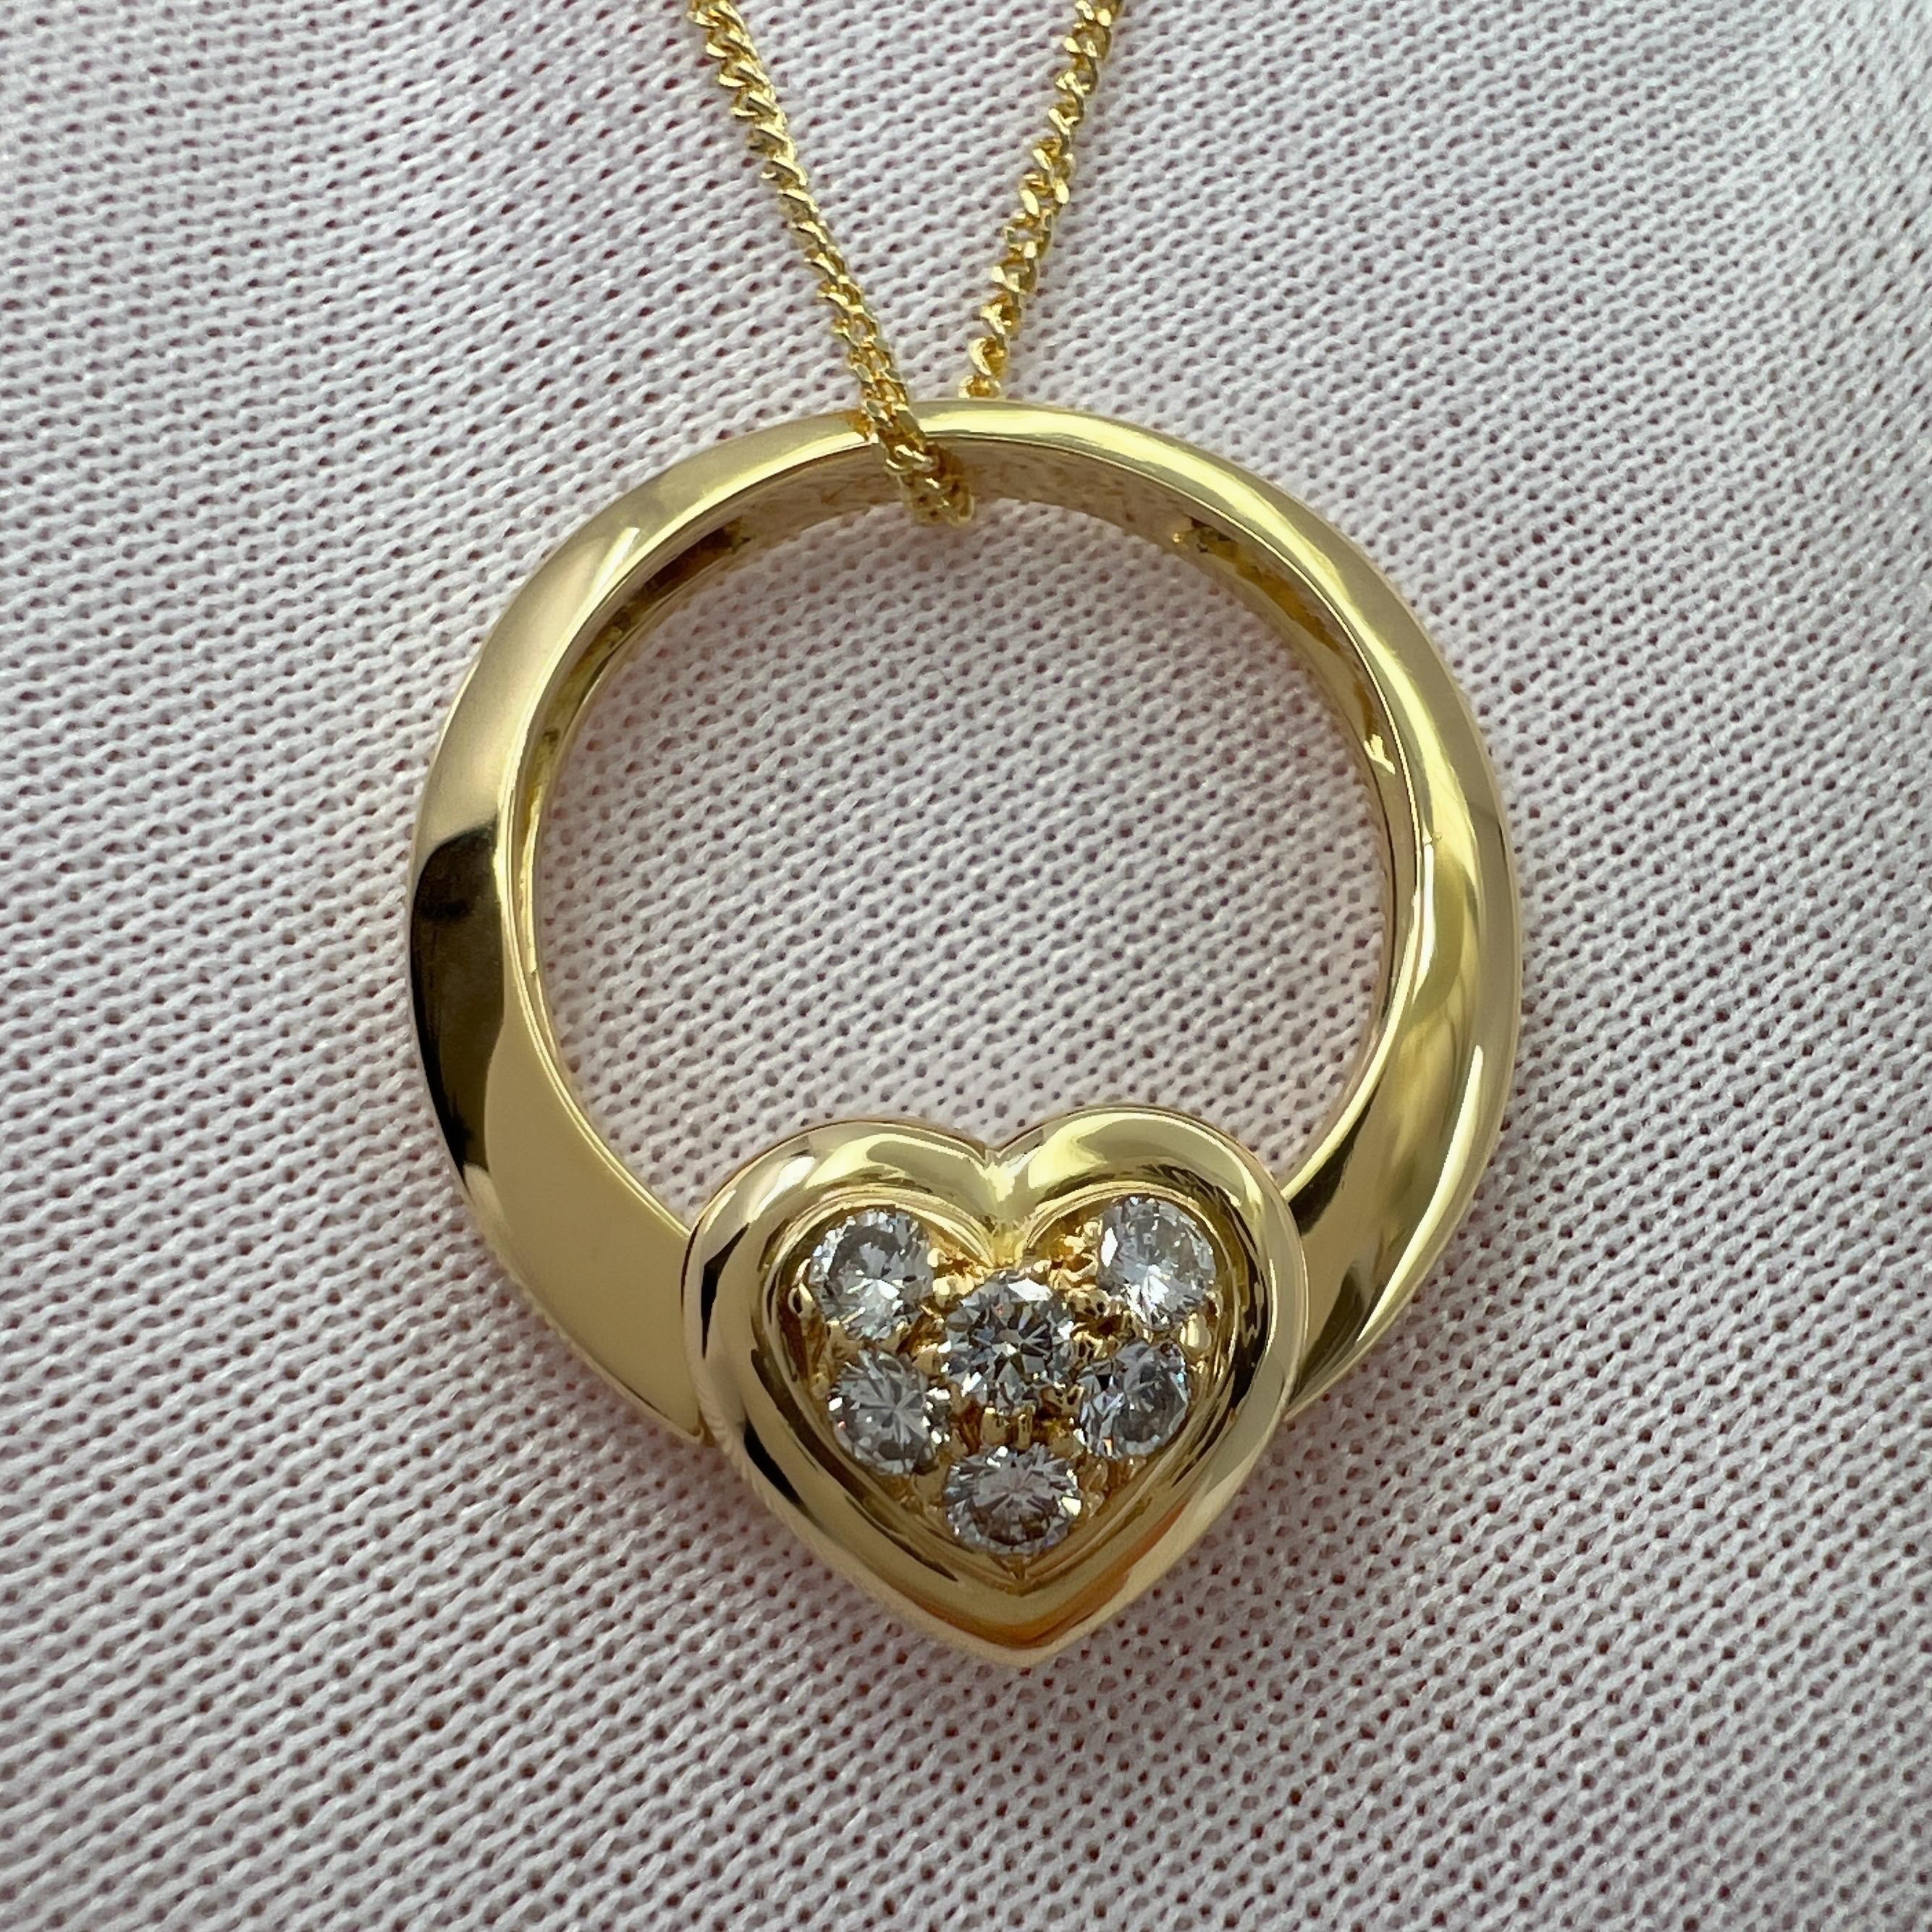 Rare Vintage Van Cleef & Arpels 18k Yellow Gold Diamond Heart Ring And Pendant For Sale 1